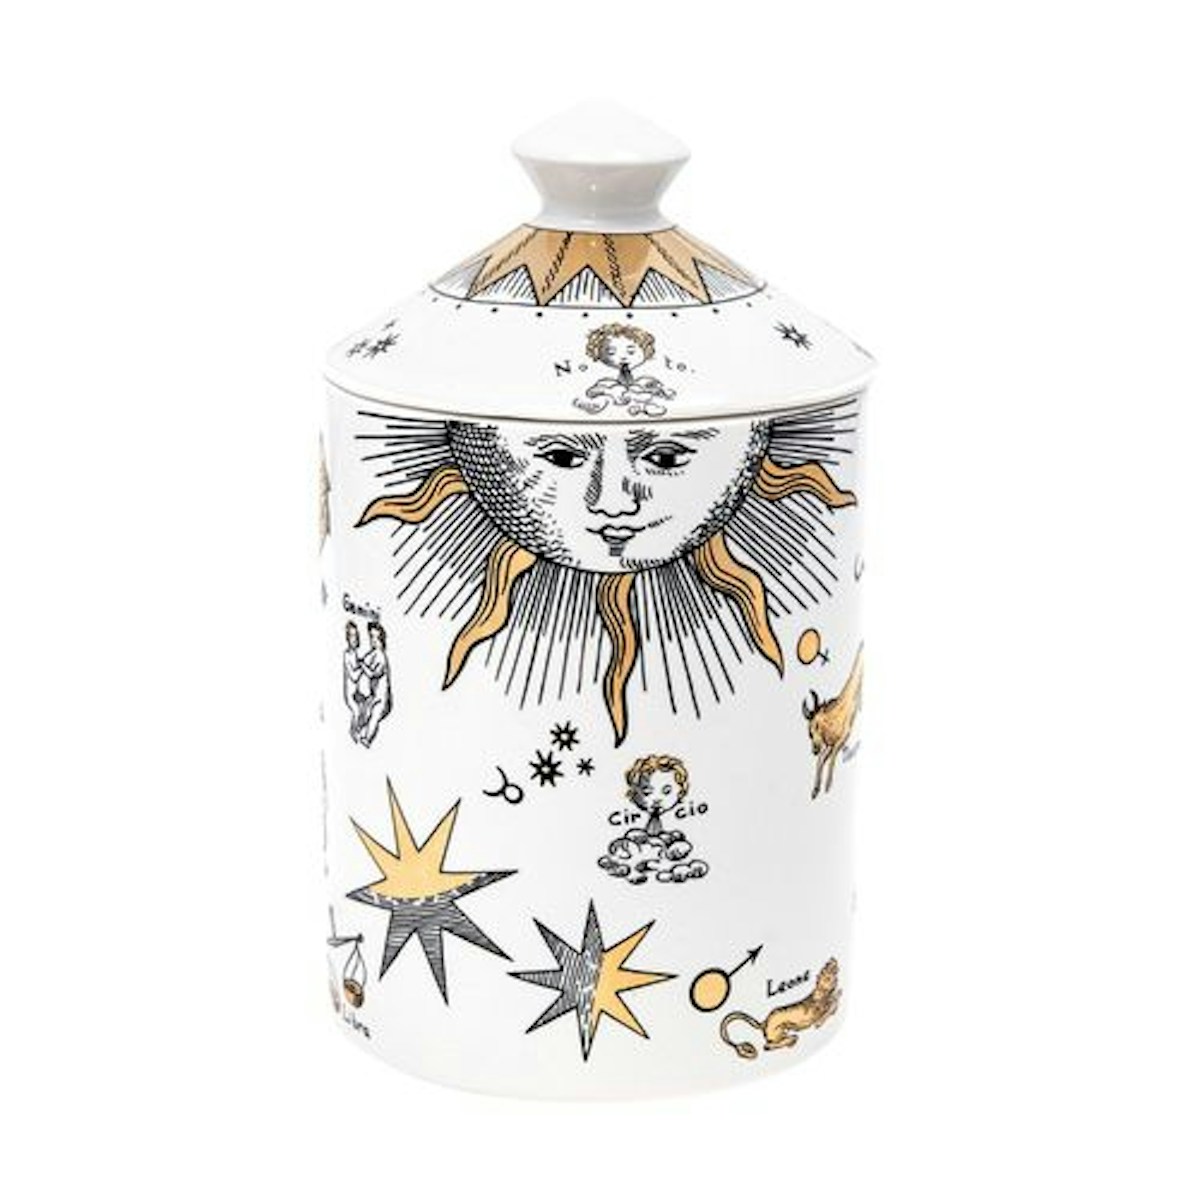 Astronomici Bianco Candle - 12 Best Scented Candles & Fragrances For Your Home - Style Guide - LuxDeco.com